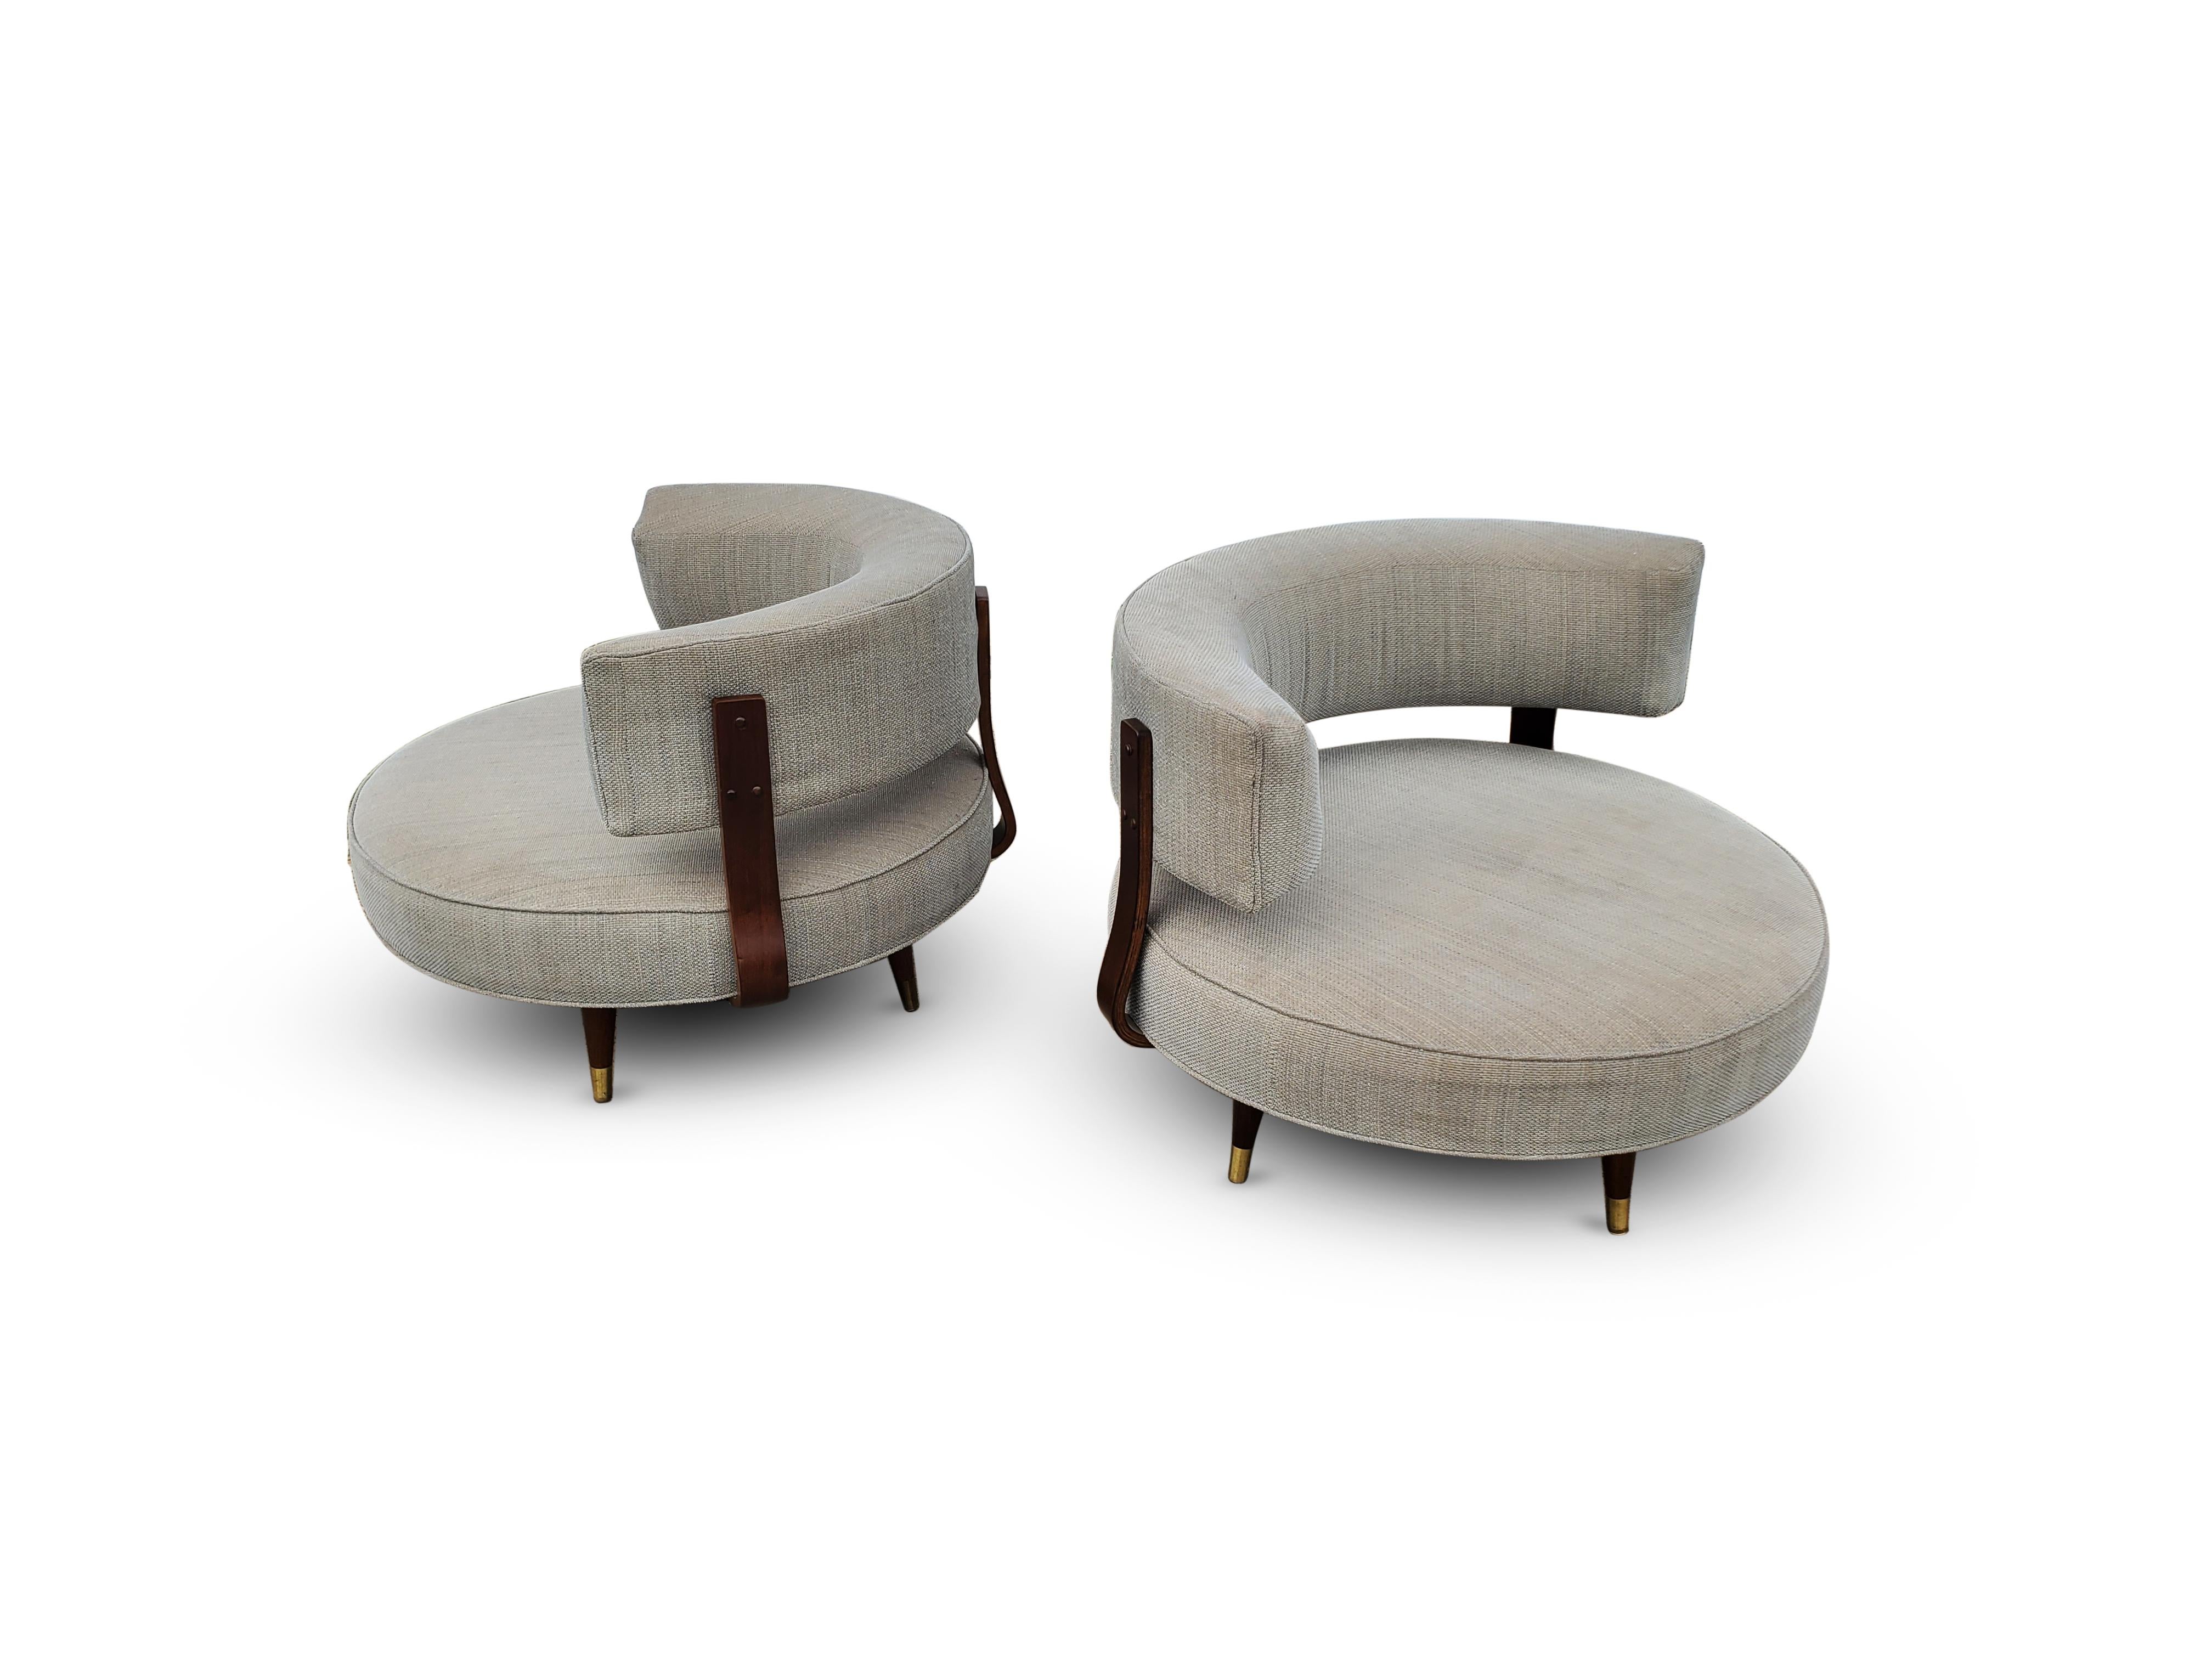 20th Century Pair of Adrian Pearsall for Craft Associates Large Round Swivel Chairs 1426-RO